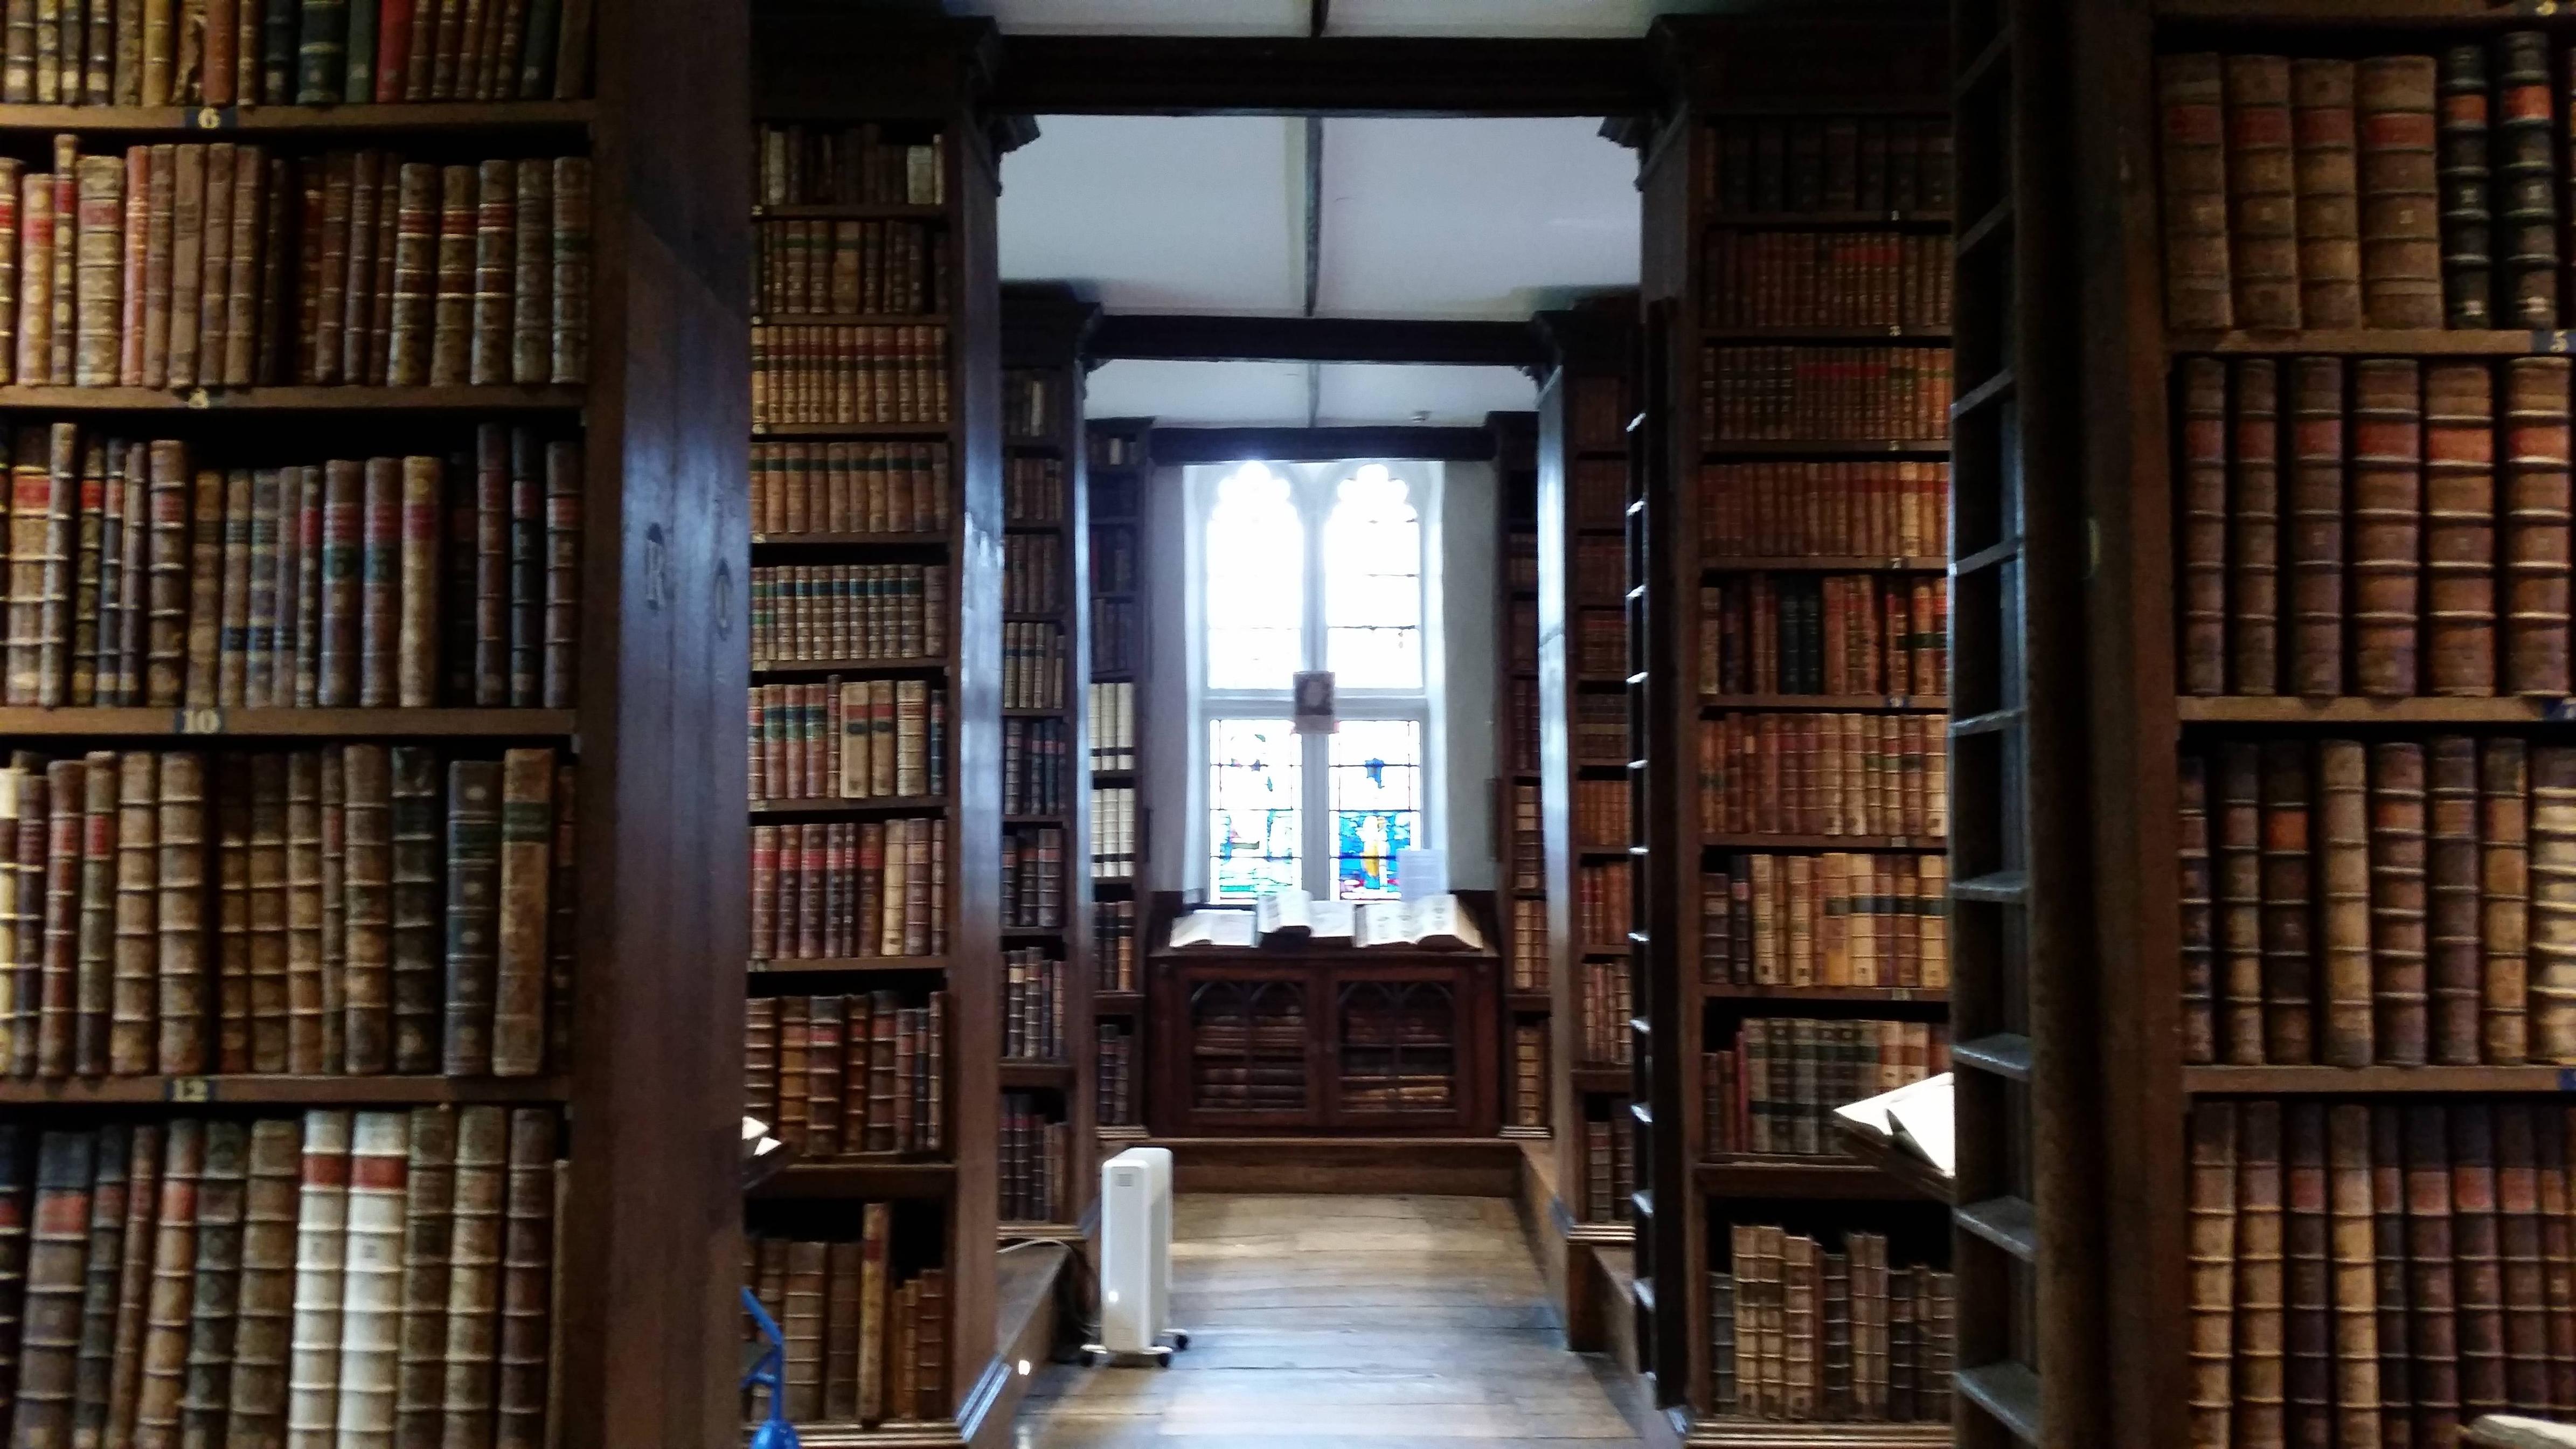 A library at the University of Oxford